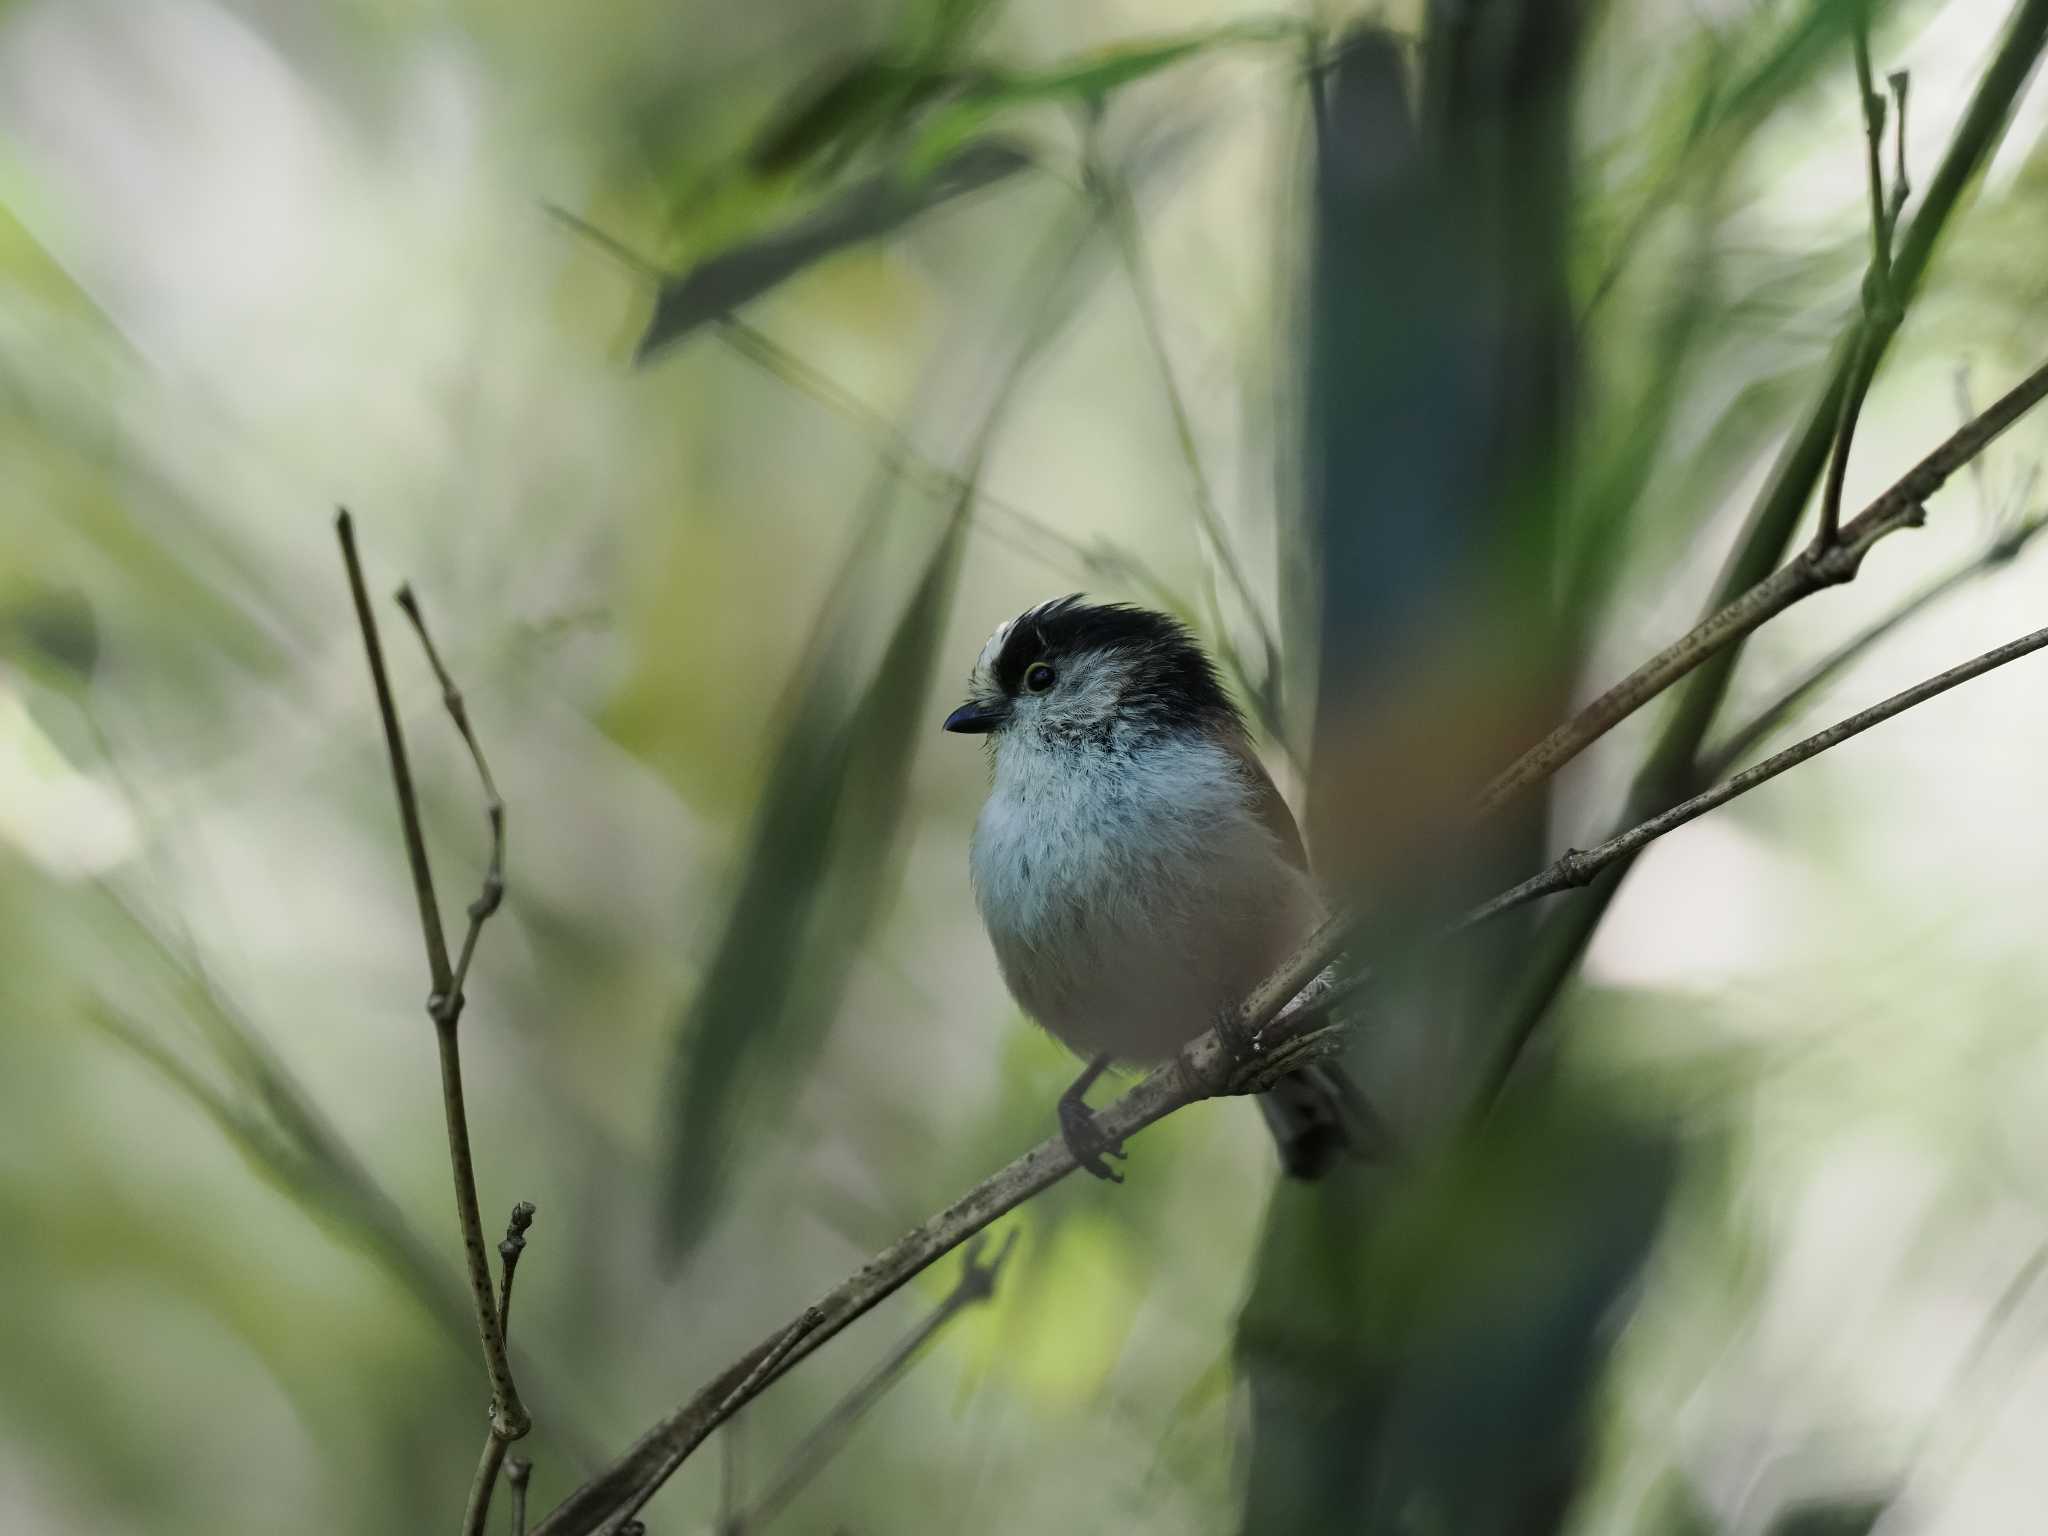 Photo of Long-tailed Tit at 清水寺 by 石雅